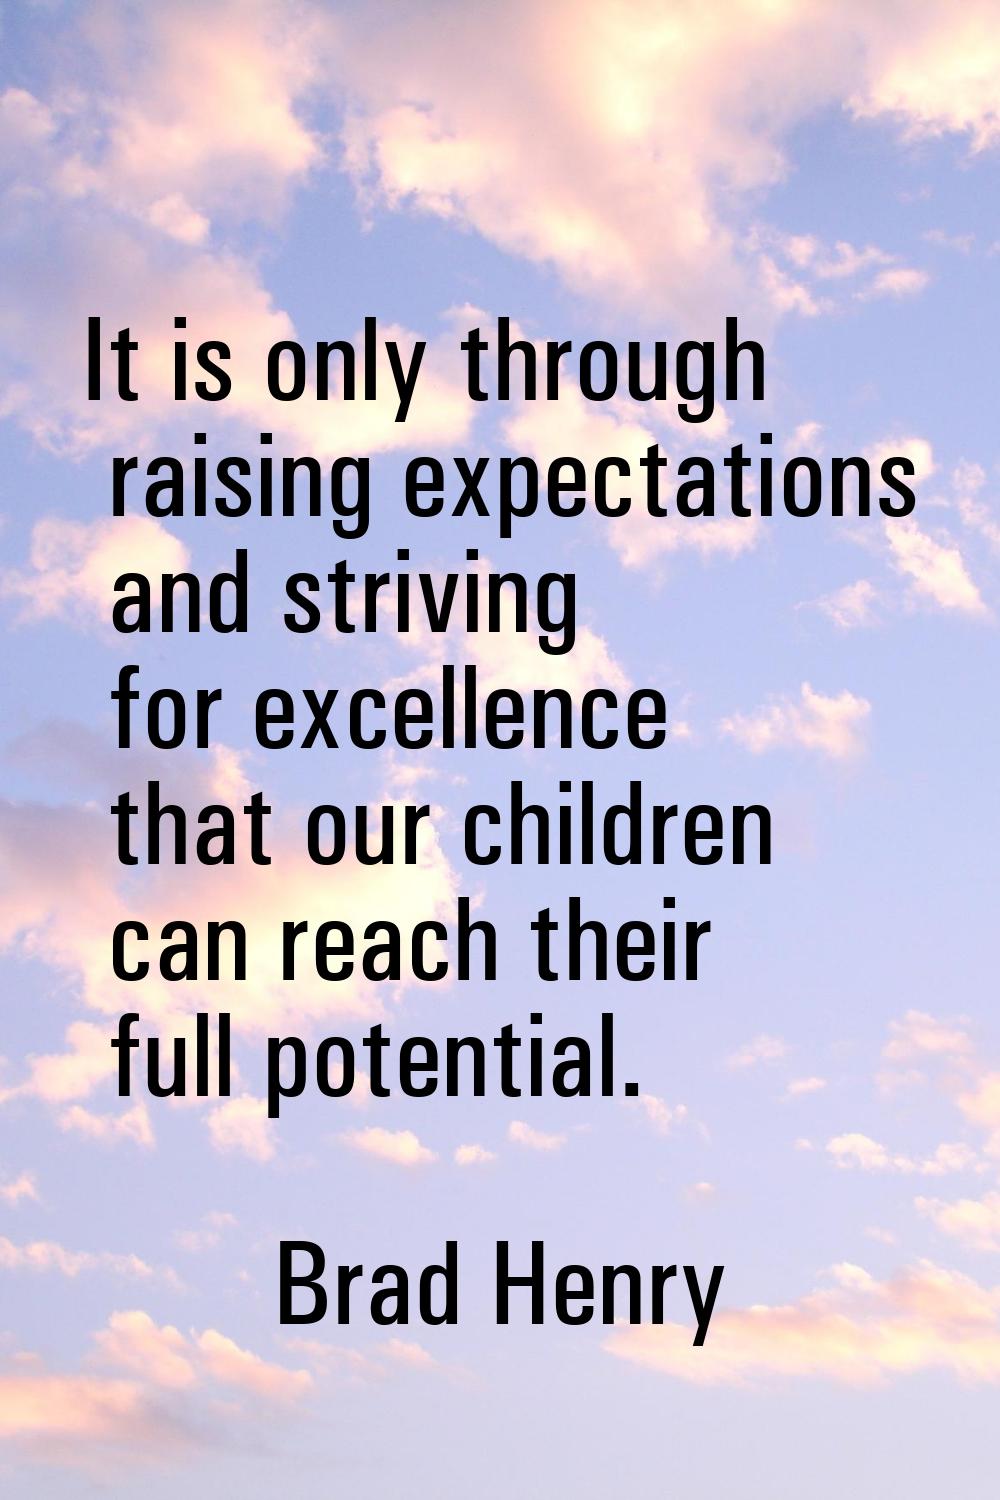 It is only through raising expectations and striving for excellence that our children can reach the